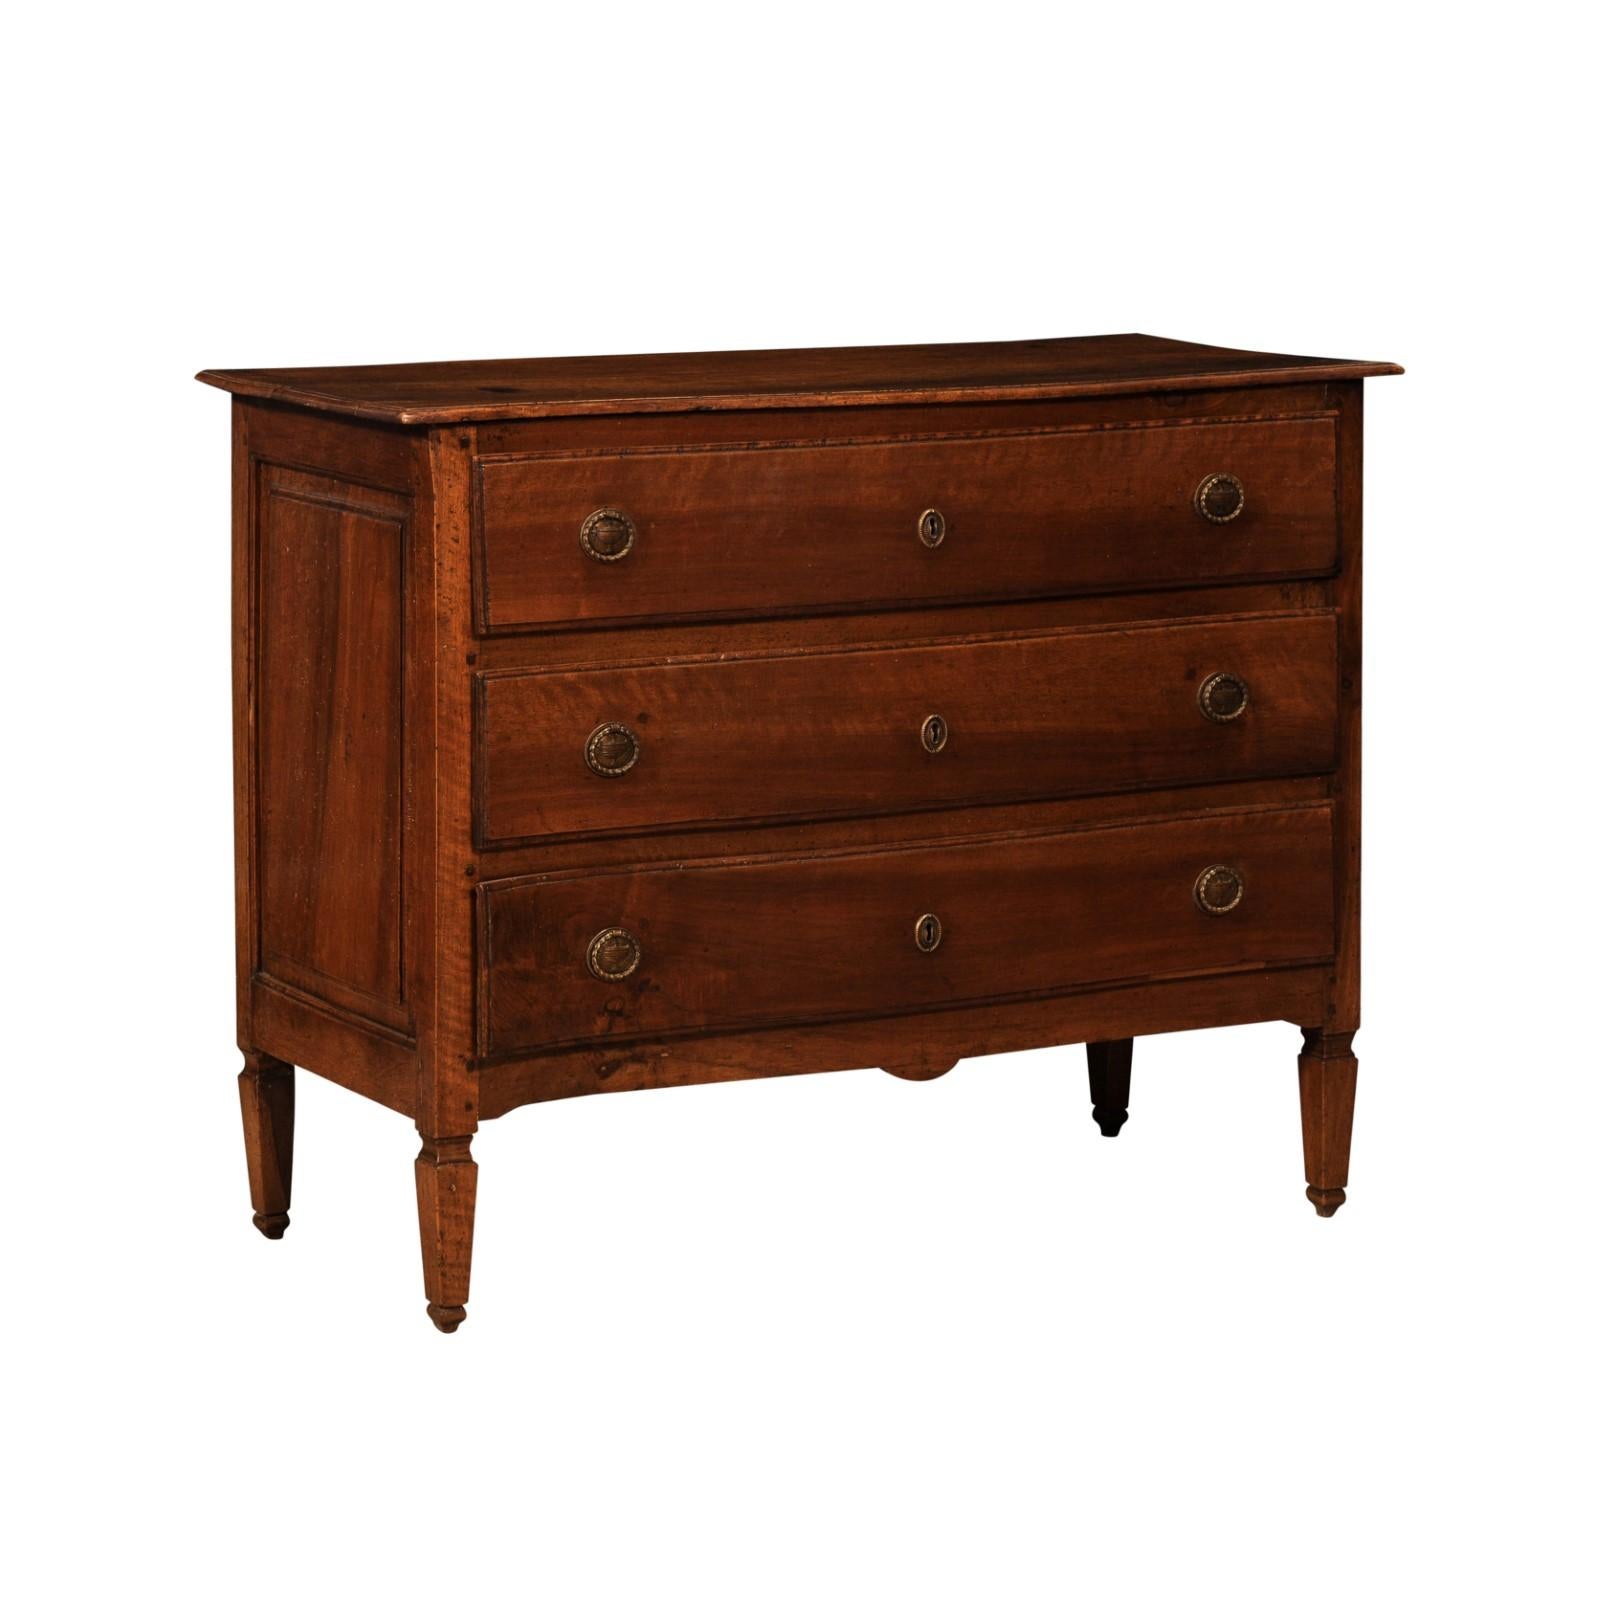 Italian 1820s Serpentine Front Walnut Commode with Three Drawers For Sale 7